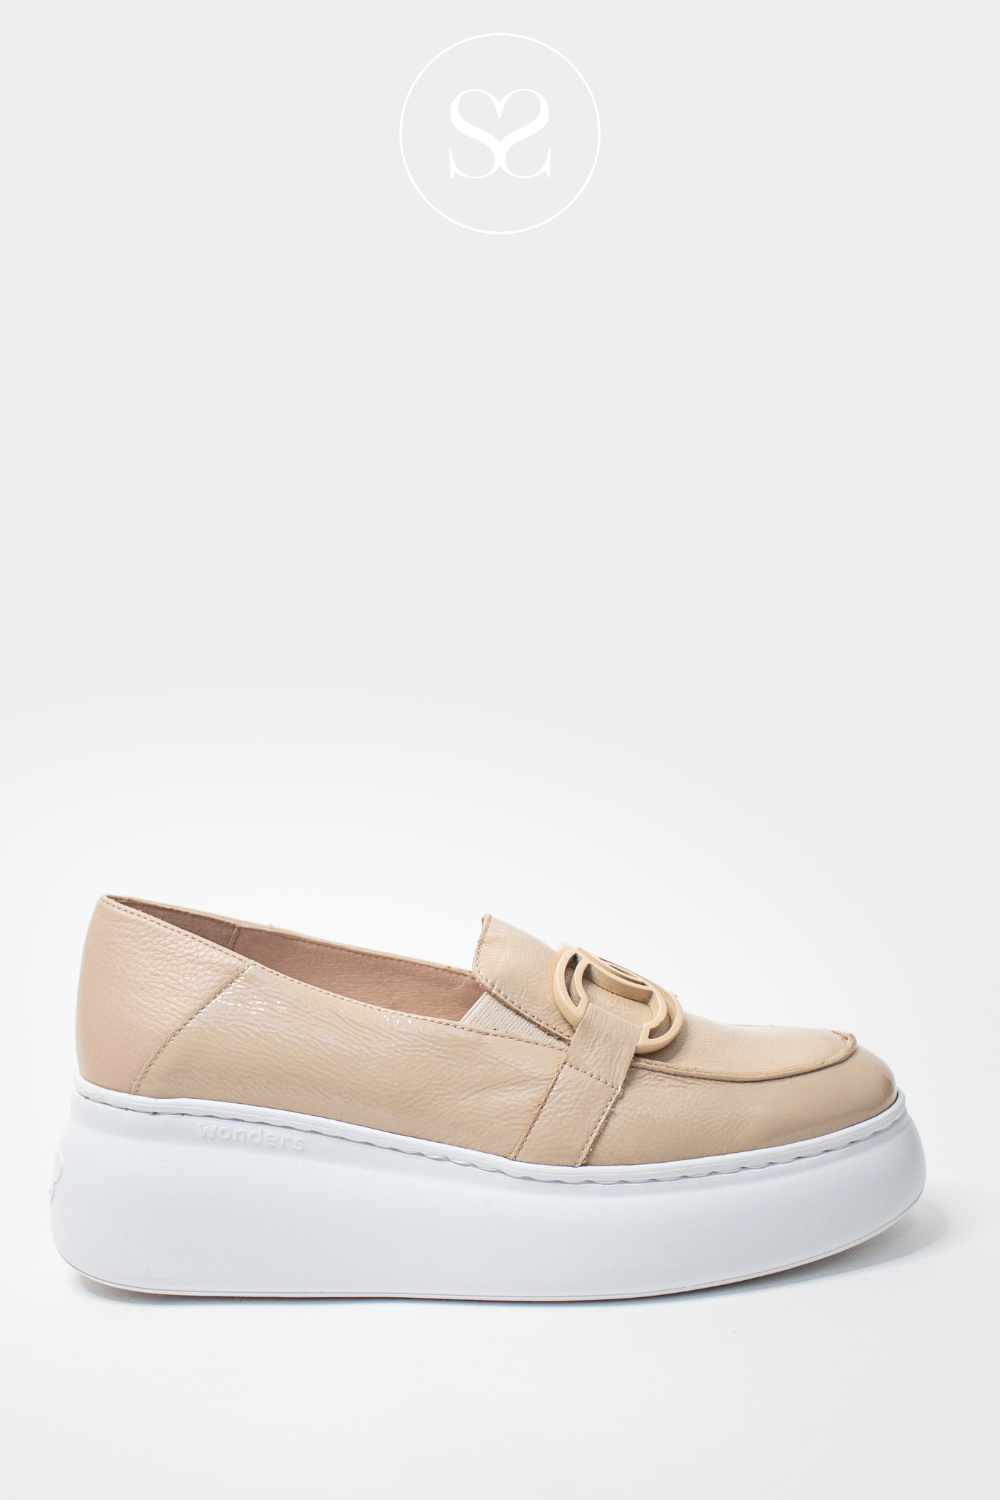 WONDERS A-2652 NUDE PATENT LEATHER FLATFORM WEDGE SLIP ON LOAFERS